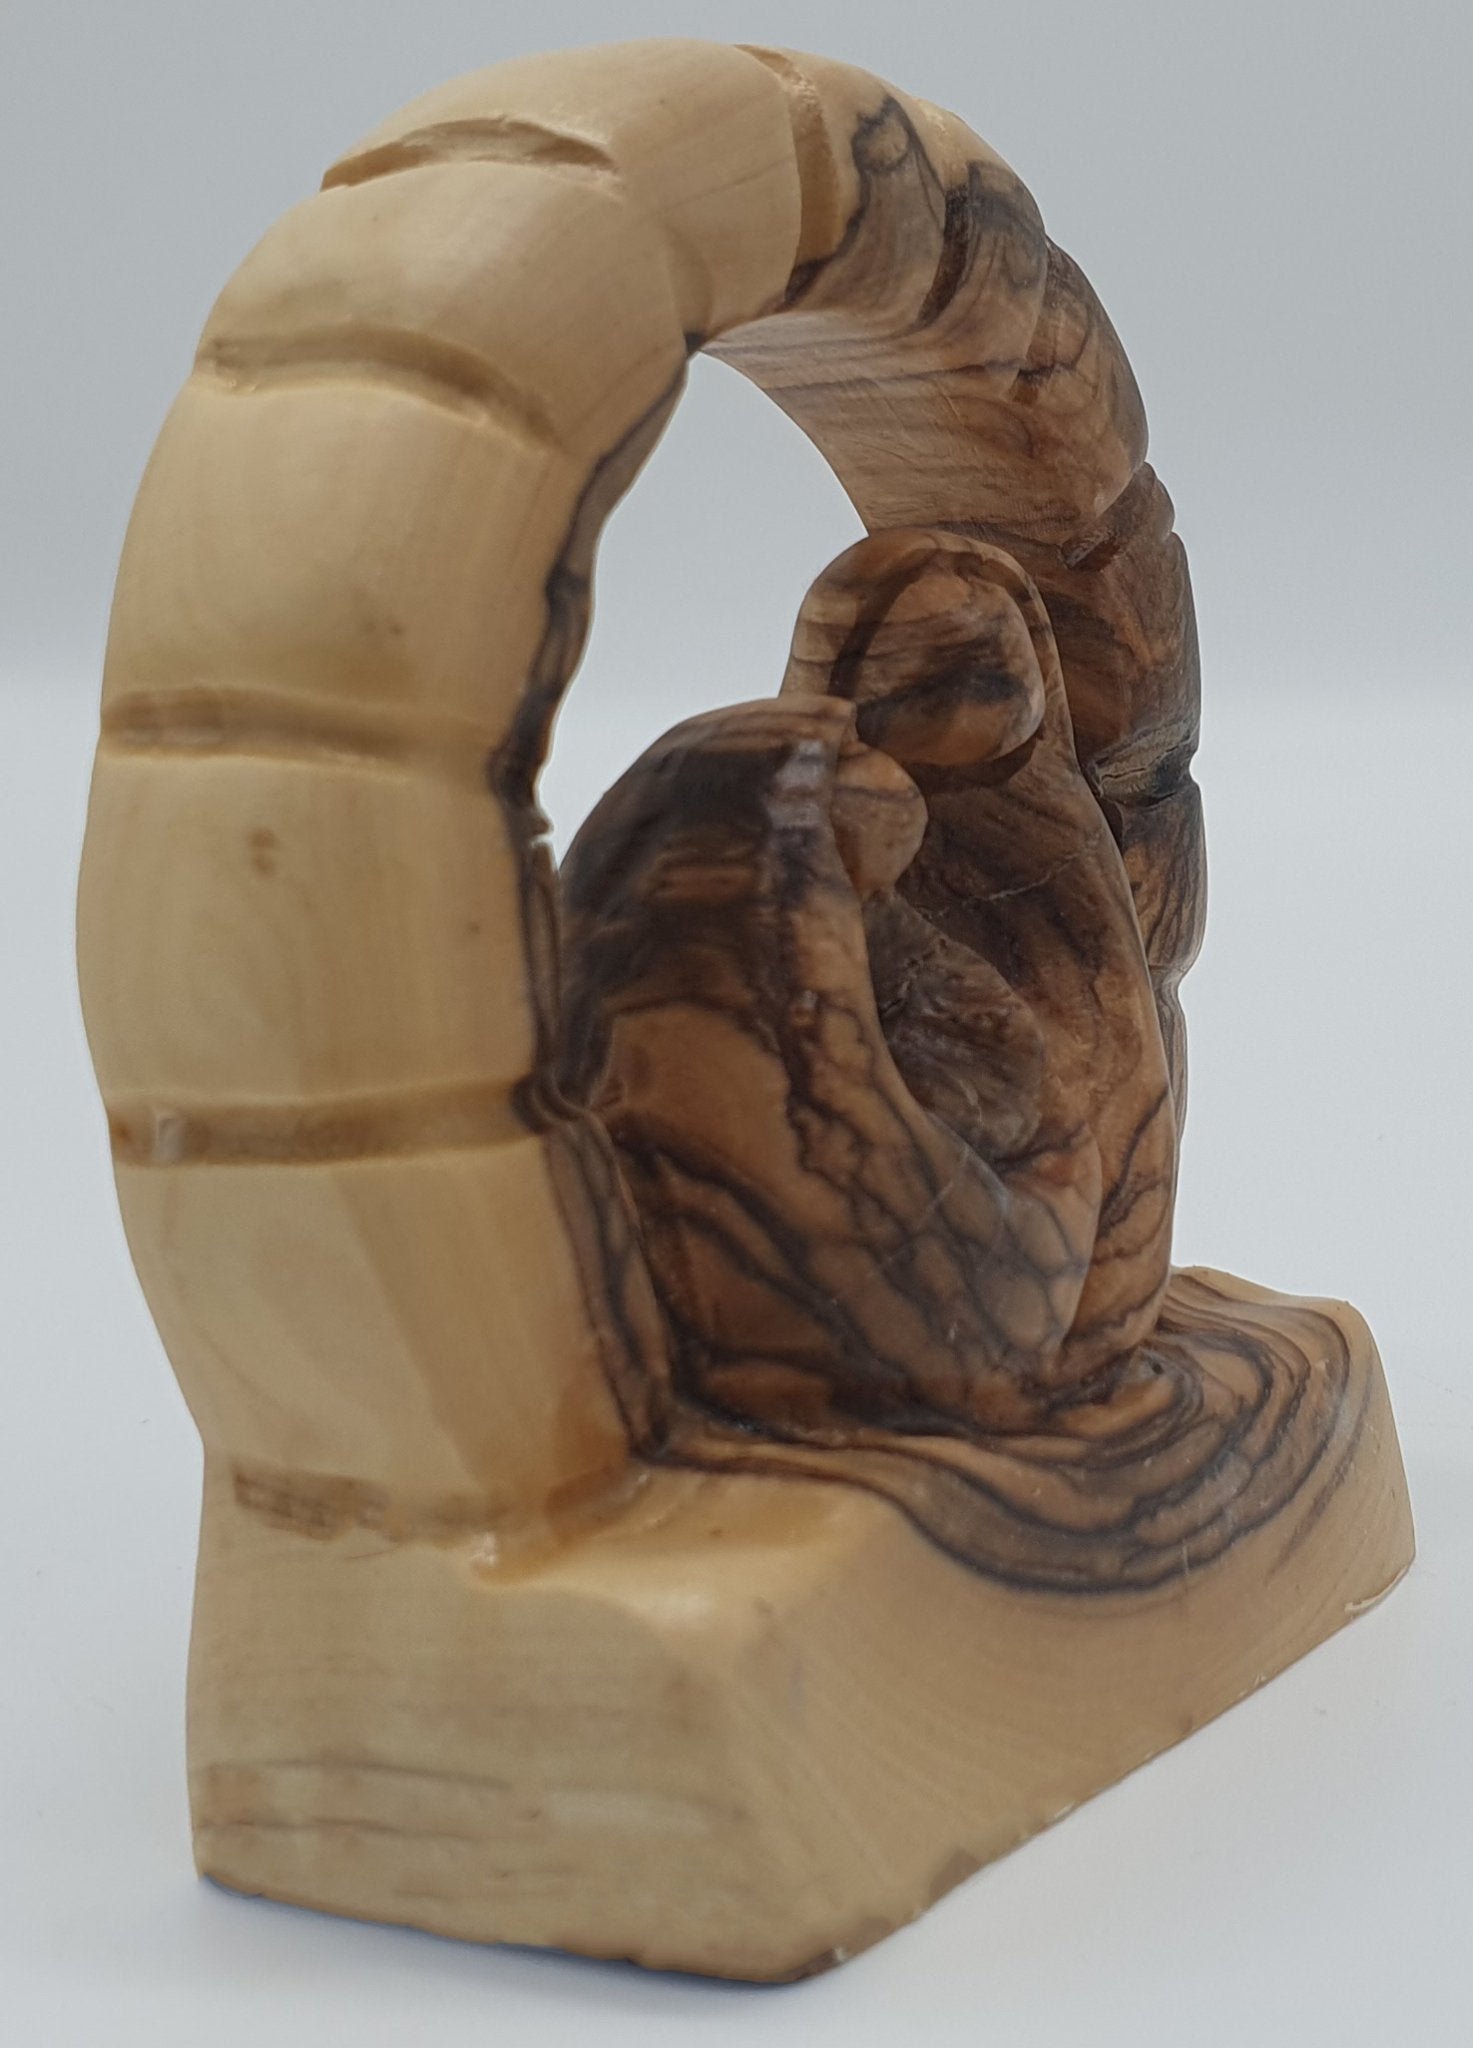 Olive Wood Holy Family Figurine - A Unique Religious Home Décor Gift for the Holiday Season - Zuluf